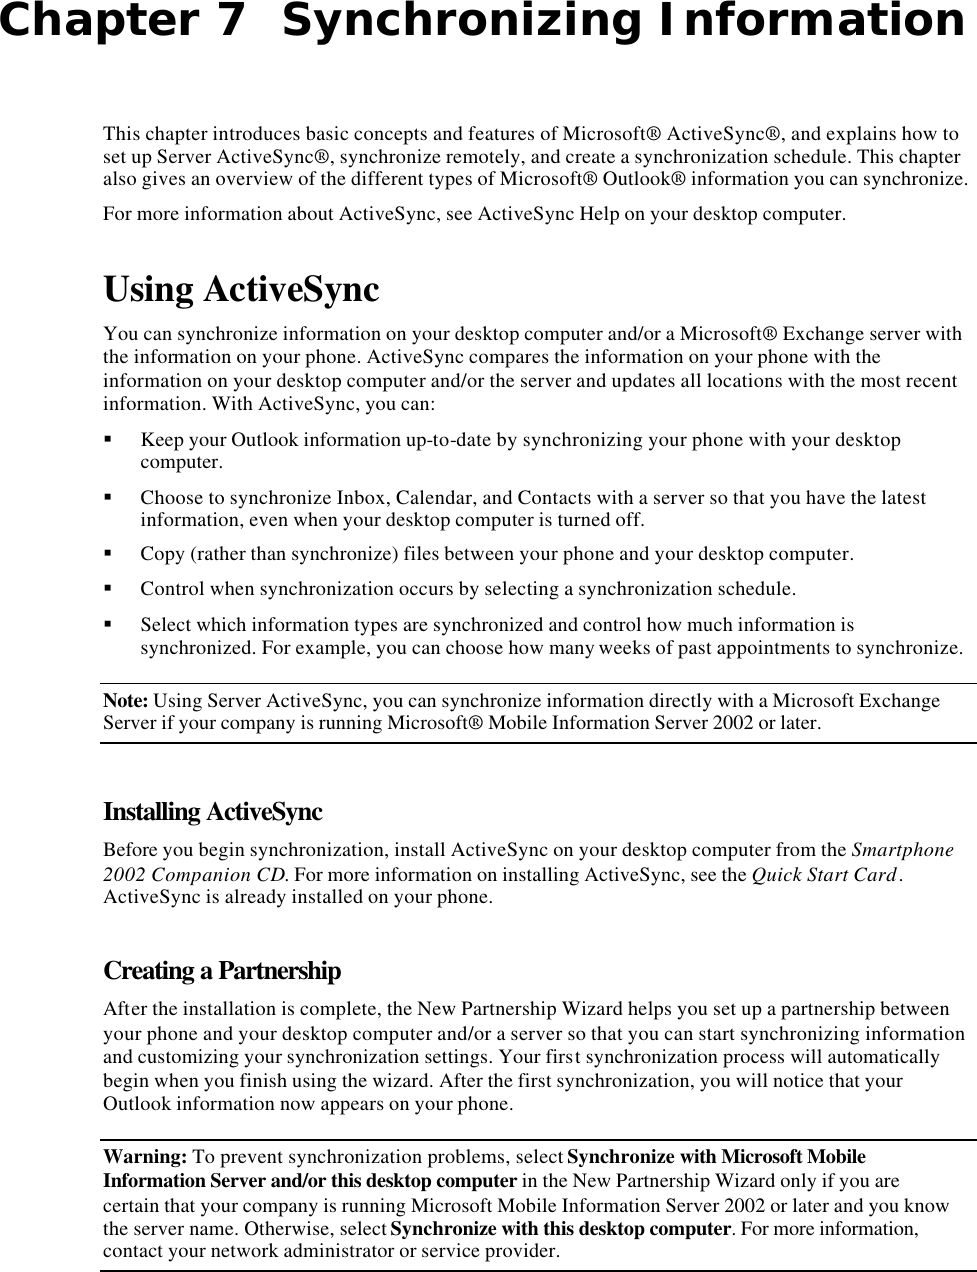 Chapter 7  Synchronizing Information This chapter introduces basic concepts and features of Microsoft® ActiveSync®, and explains how to set up Server ActiveSync®, synchronize remotely, and create a synchronization schedule. This chapter also gives an overview of the different types of Microsoft® Outlook® information you can synchronize. For more information about ActiveSync, see ActiveSync Help on your desktop computer. Using ActiveSync You can synchronize information on your desktop computer and/or a Microsoft® Exchange server with the information on your phone. ActiveSync compares the information on your phone with the information on your desktop computer and/or the server and updates all locations with the most recent information. With ActiveSync, you can: § Keep your Outlook information up-to-date by synchronizing your phone with your desktop computer. § Choose to synchronize Inbox, Calendar, and Contacts with a server so that you have the latest information, even when your desktop computer is turned off. § Copy (rather than synchronize) files between your phone and your desktop computer. § Control when synchronization occurs by selecting a synchronization schedule. § Select which information types are synchronized and control how much information is synchronized. For example, you can choose how many weeks of past appointments to synchronize. Note: Using Server ActiveSync, you can synchronize information directly with a Microsoft Exchange Server if your company is running Microsoft® Mobile Information Server 2002 or later. Installing ActiveSync Before you begin synchronization, install ActiveSync on your desktop computer from the Smartphone 2002 Companion CD. For more information on installing ActiveSync, see the Quick Start Card. ActiveSync is already installed on your phone. Creating a Partnership After the installation is complete, the New Partnership Wizard helps you set up a partnership between your phone and your desktop computer and/or a server so that you can start synchronizing information and customizing your synchronization settings. Your first synchronization process will automatically begin when you finish using the wizard. After the first synchronization, you will notice that your Outlook information now appears on your phone. Warning: To prevent synchronization problems, select Synchronize with Microsoft Mobile Information Server and/or this desktop computer in the New Partnership Wizard only if you are certain that your company is running Microsoft Mobile Information Server 2002 or later and you know the server name. Otherwise, select Synchronize with this desktop computer. For more information, contact your network administrator or service provider. 